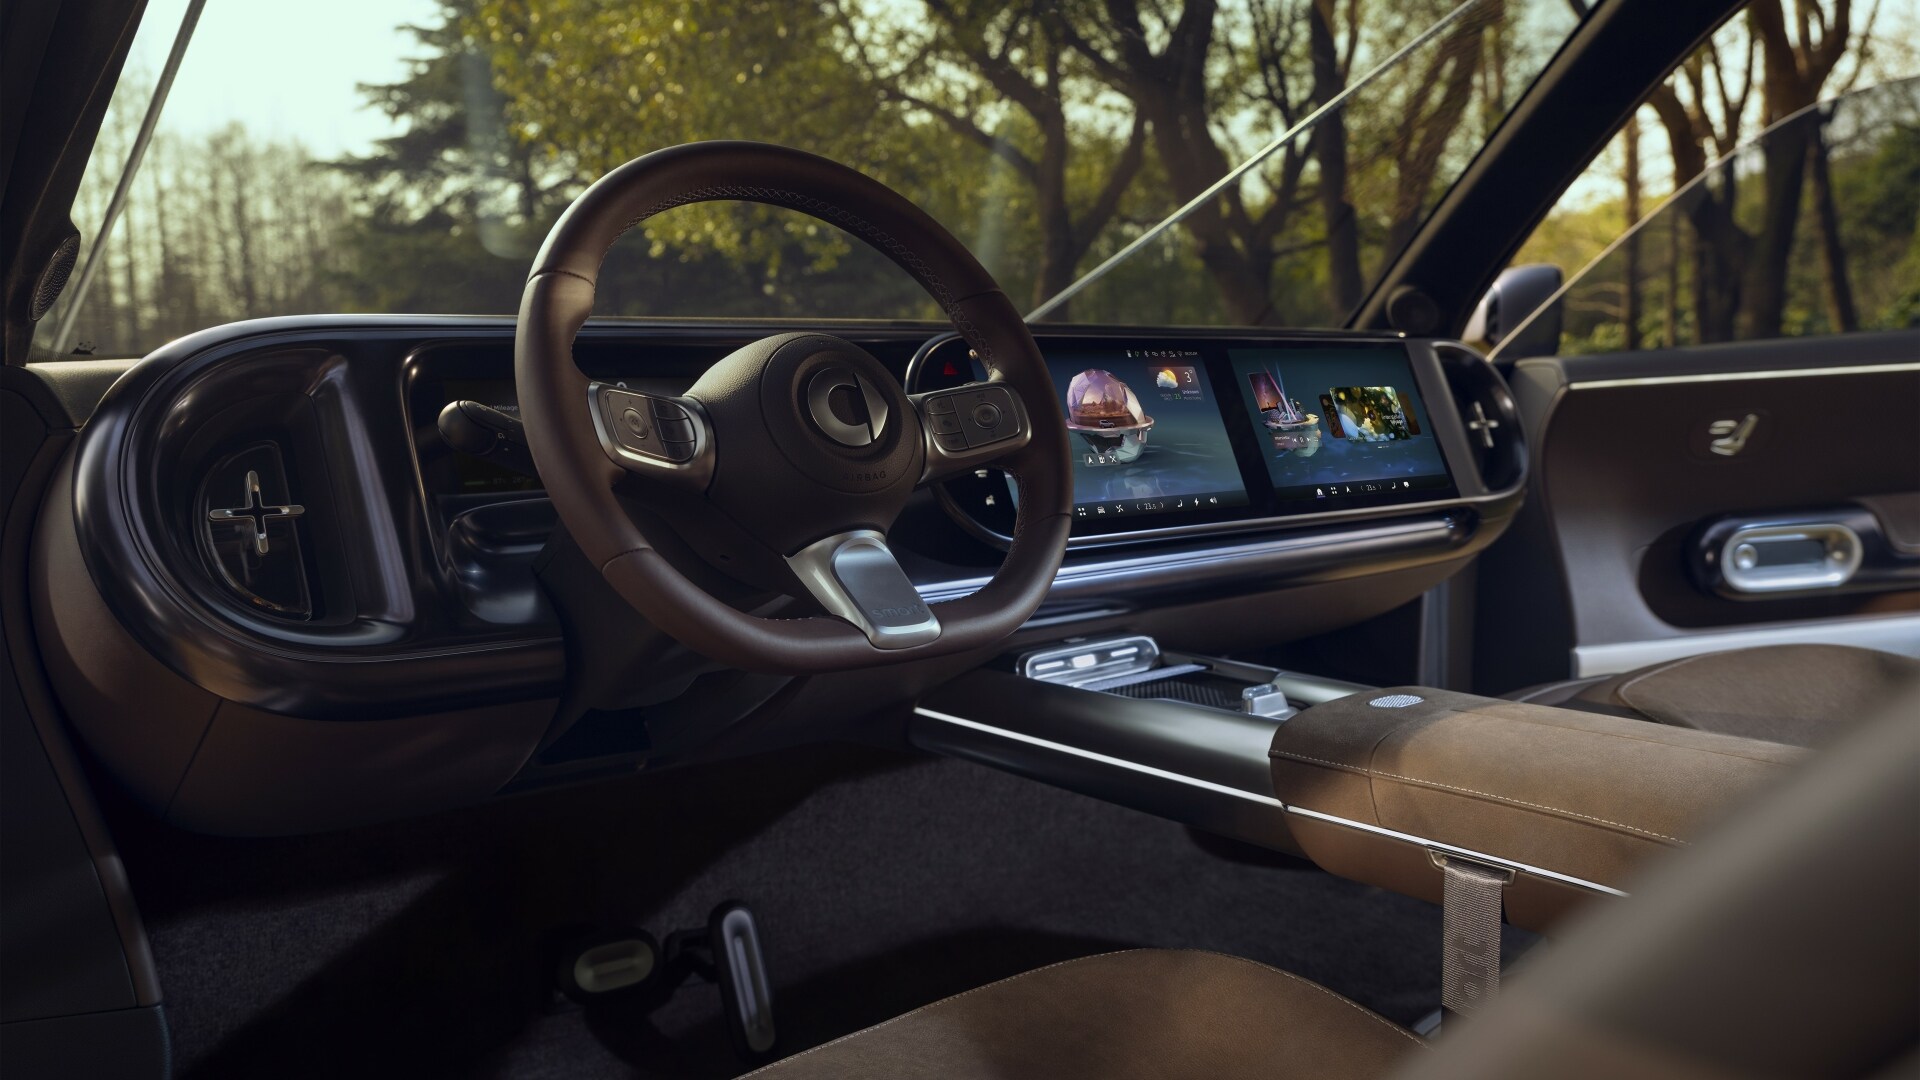 The Interior, Steering, Dashboard, And Central Console Of The New Smart Concept #5 (Credits Newsroom HQ Smart Automobile)